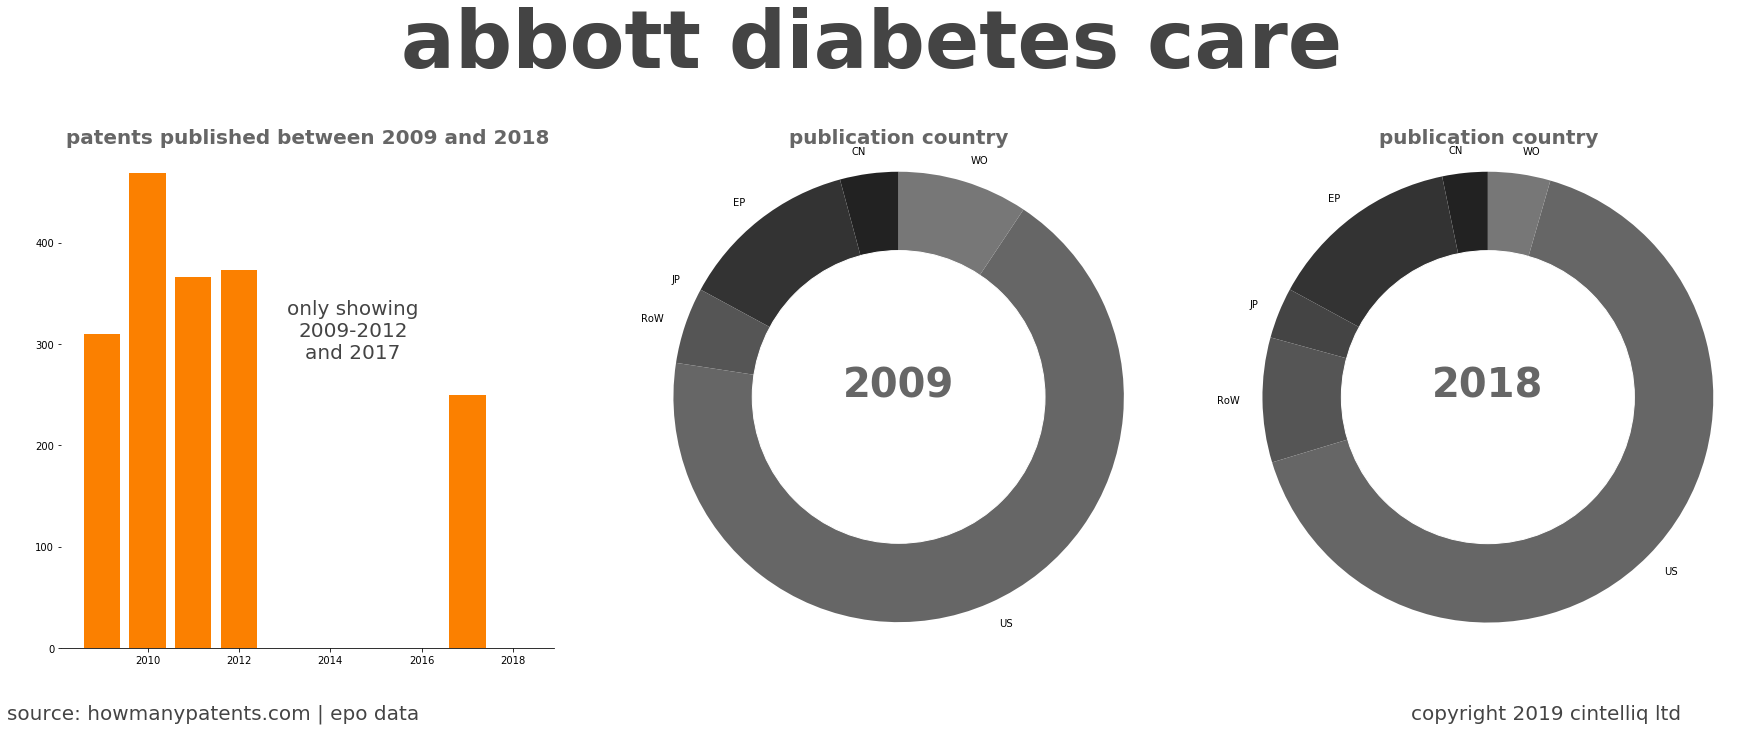 summary of patents for Abbott Diabetes Care